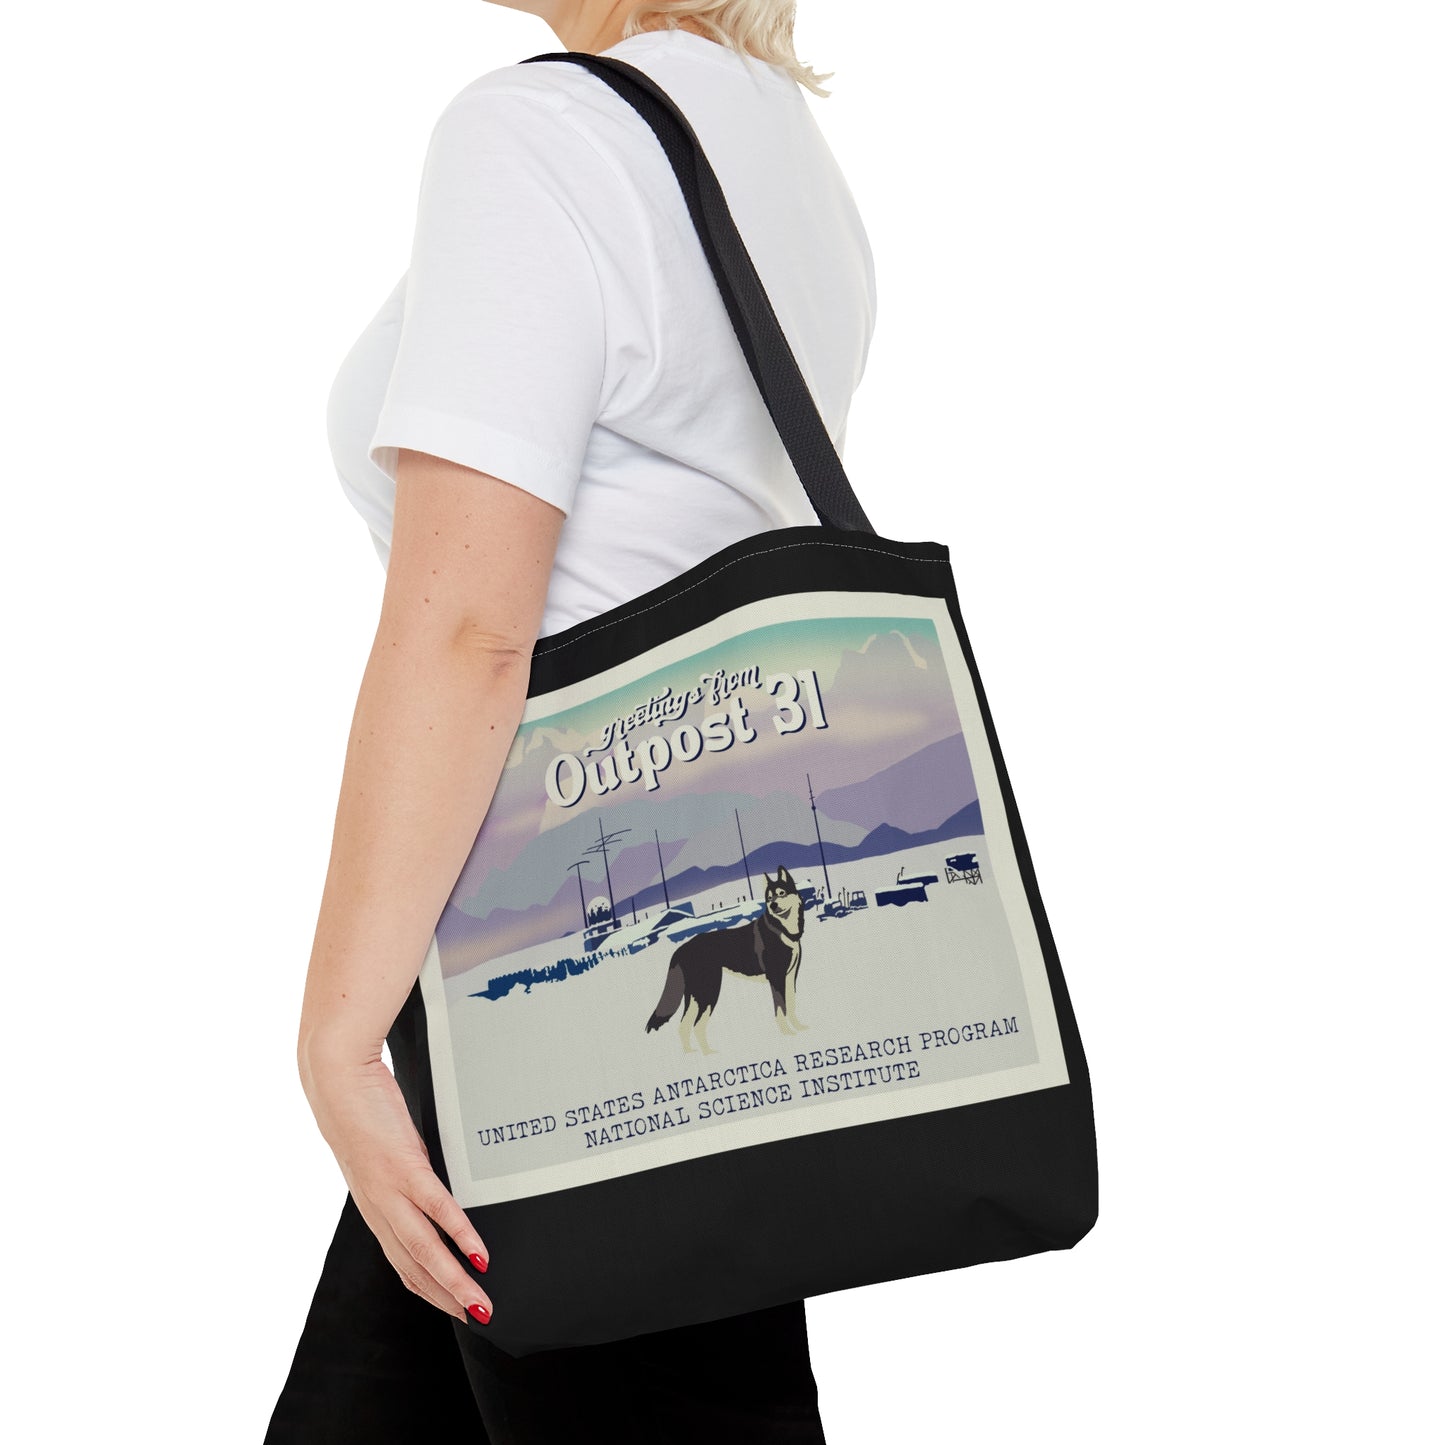 Outpost 31 Tote Bag (Black)